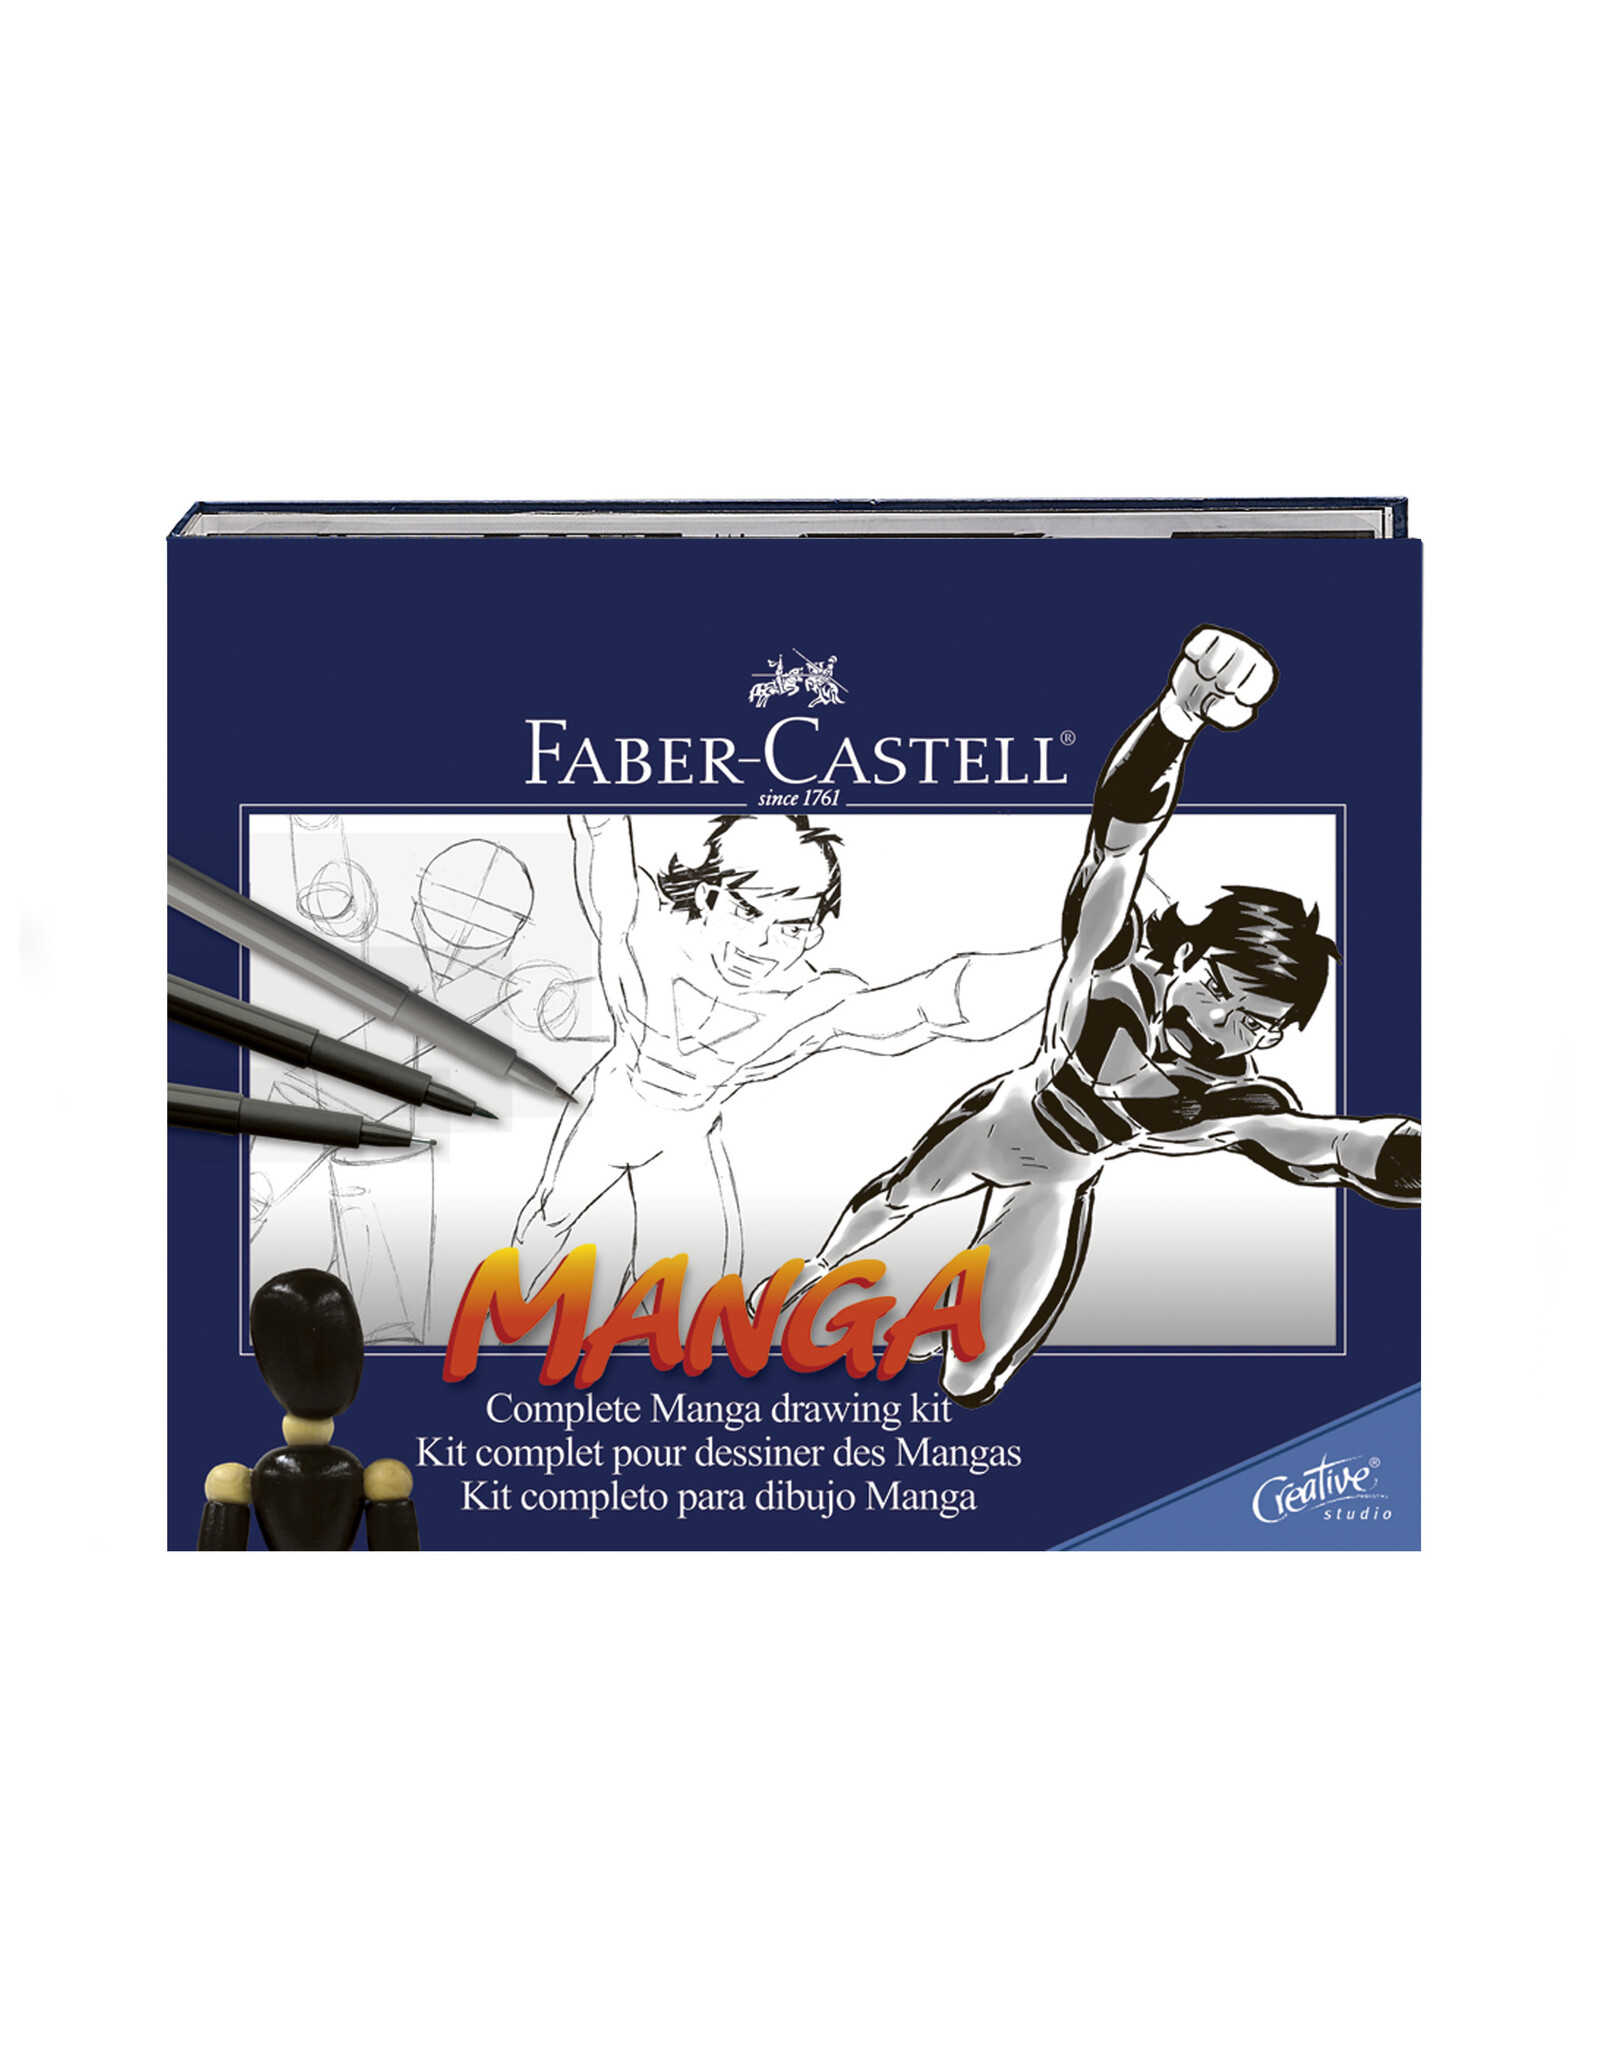 FABER-CASTELL Faber-castell Getting Started Manga Comic Kit